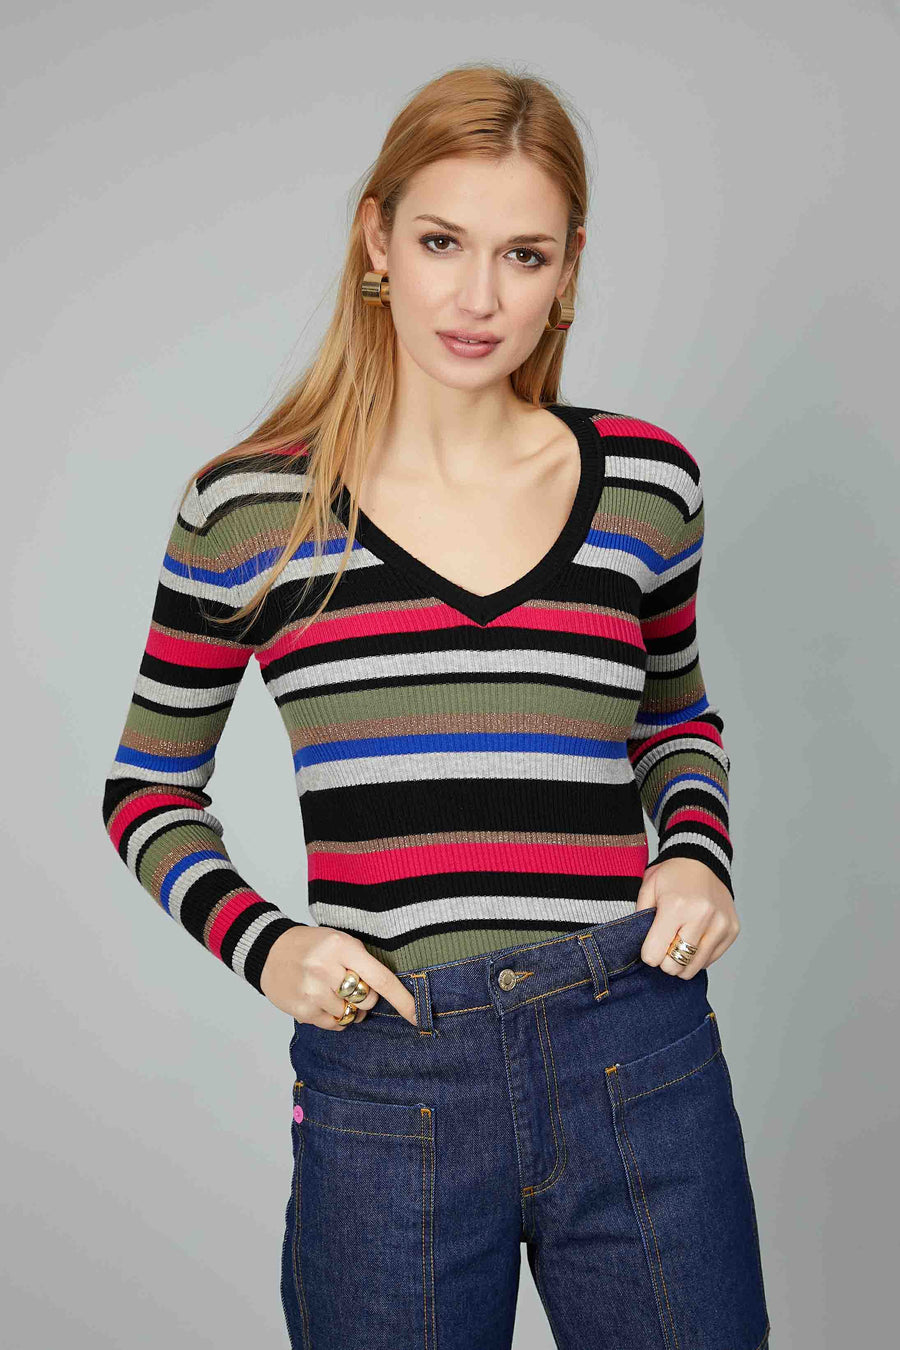 COLORFUL V-NECK SWEATER